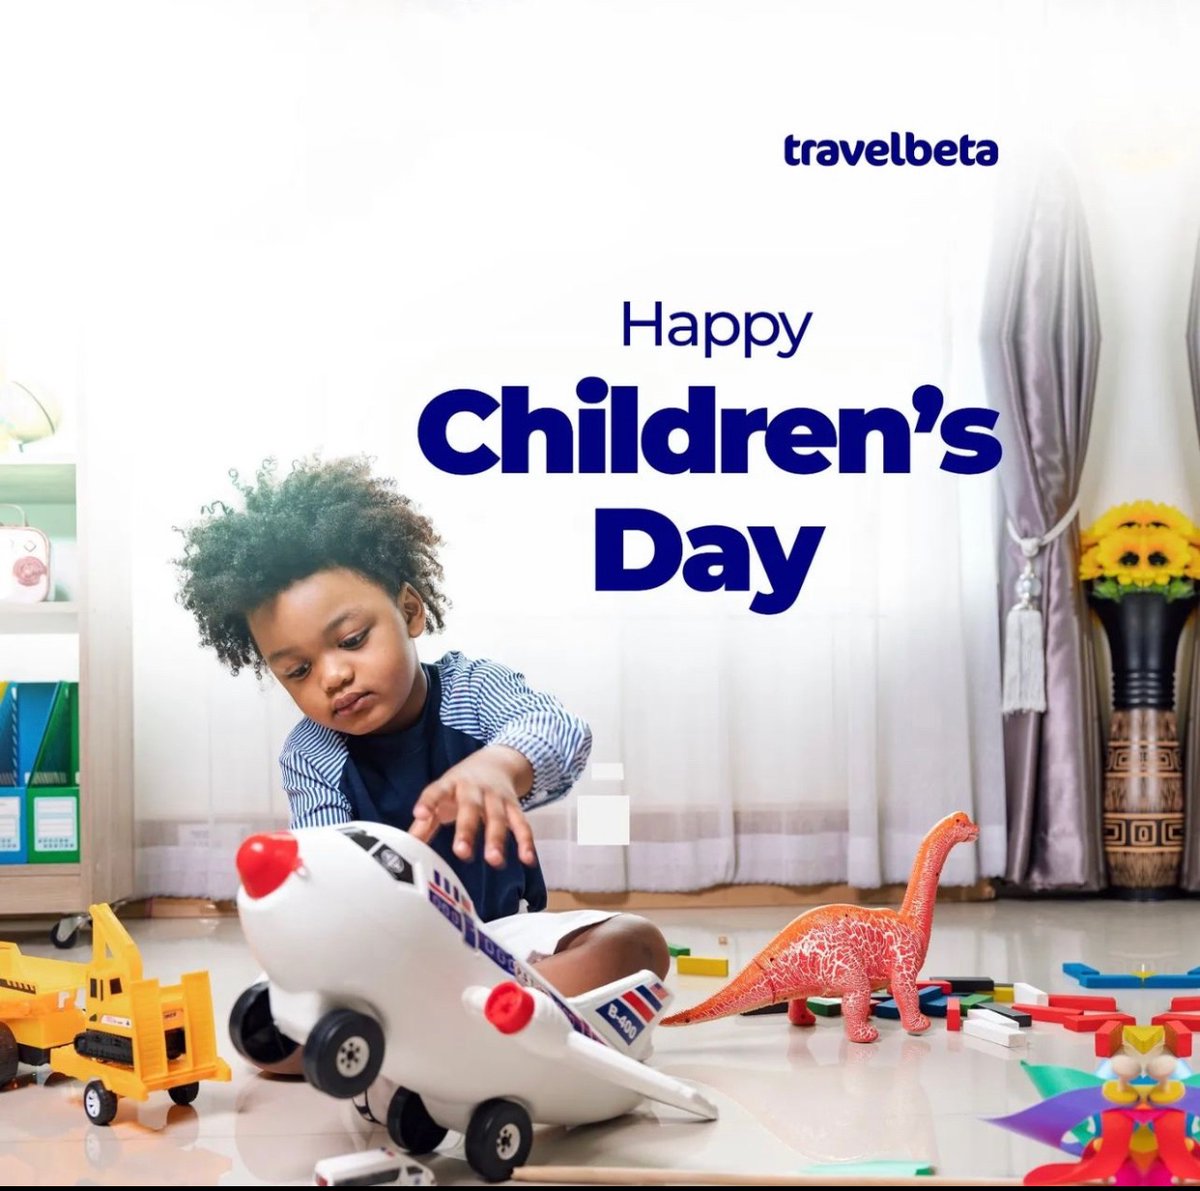 Celebrating the joy, innocence, and endless curiosity of children today!

Travelbeta wishes every child a day filled with play, laughter, and dreams that take flight. 

Happy Children's Day! 🎉🌟